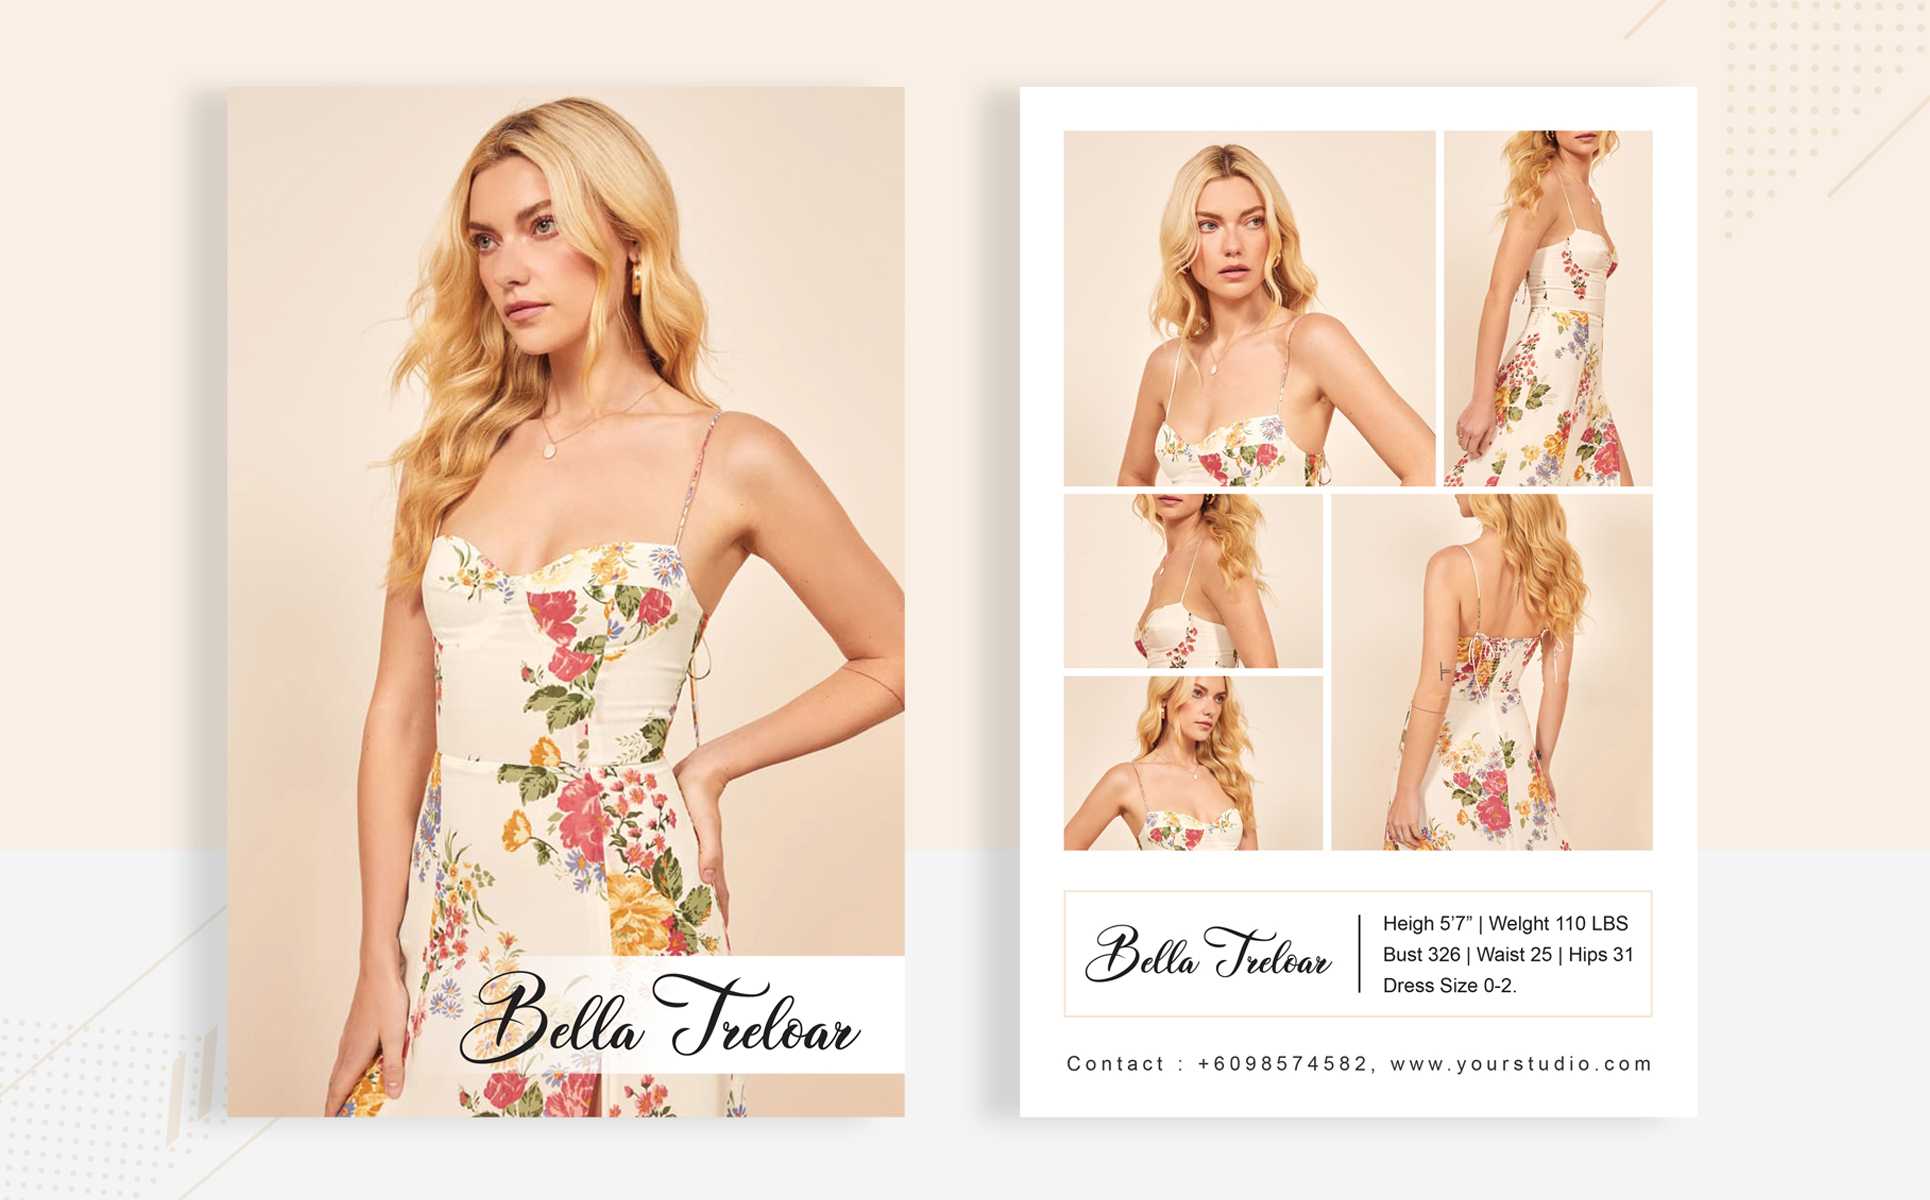 Template 83226 : Bella Treloar – Modeling Comp Card Pertaining To Download Comp Card Template